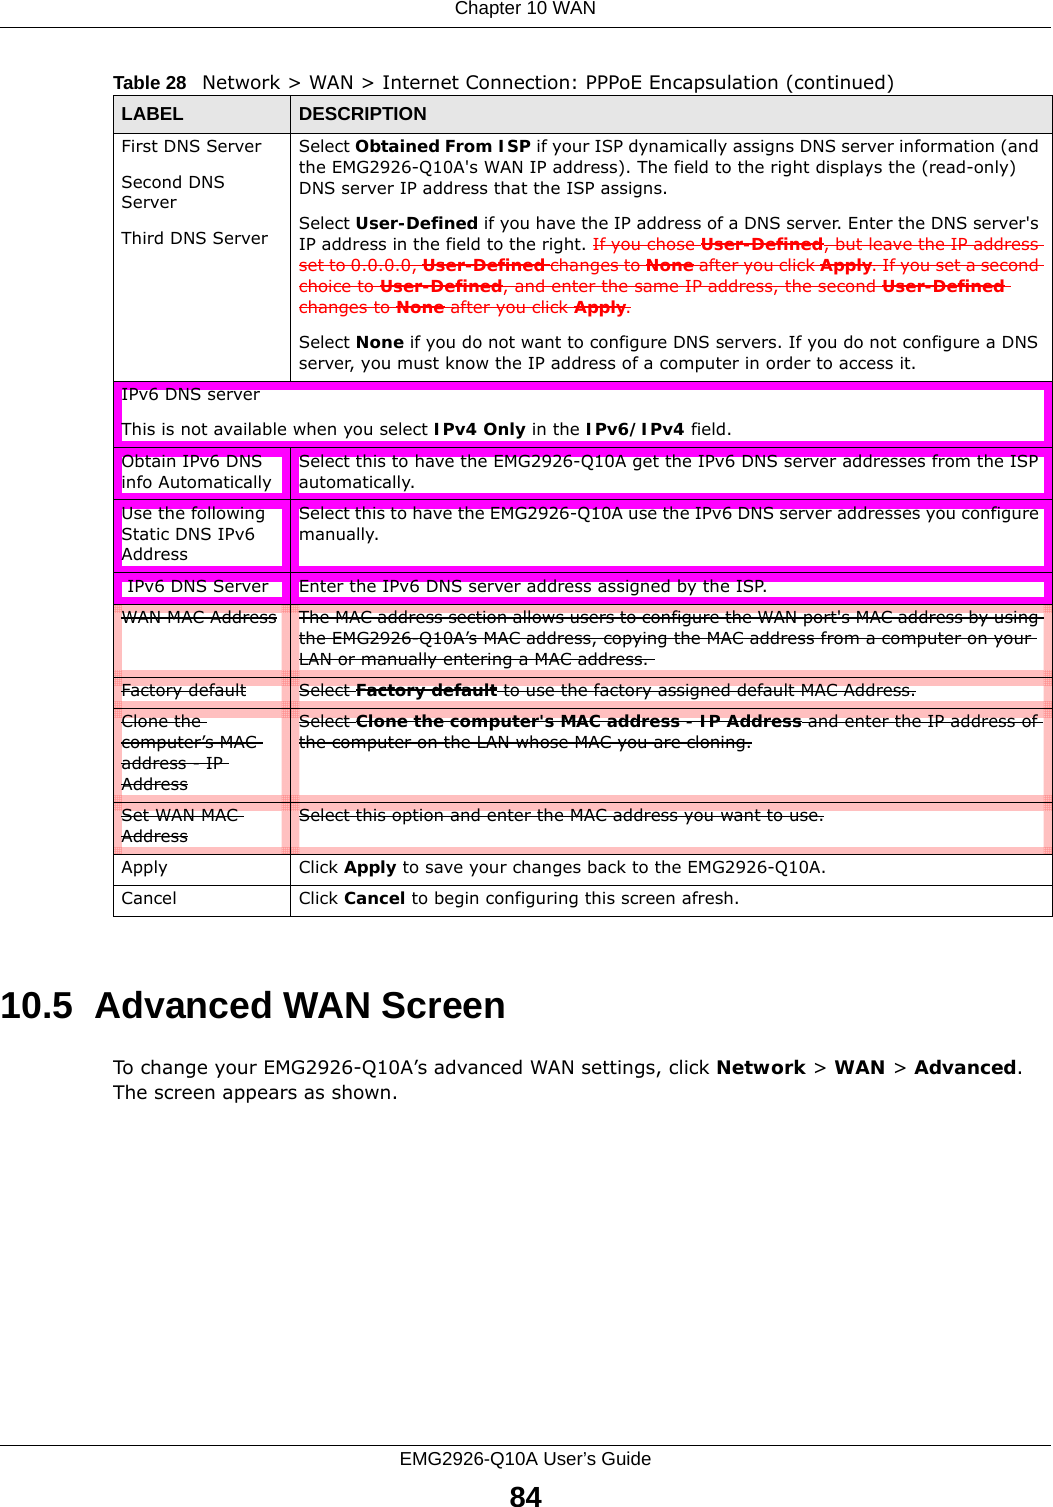 Chapter 10 WANEMG2926-Q10A User’s Guide8410.5  Advanced WAN ScreenTo change your EMG2926-Q10A’s advanced WAN settings, click Network &gt; WAN &gt; Advanced. The screen appears as shown.First DNS ServerSecond DNS ServerThird DNS Server Select Obtained From ISP if your ISP dynamically assigns DNS server information (and the EMG2926-Q10A&apos;s WAN IP address). The field to the right displays the (read-only) DNS server IP address that the ISP assigns. Select User-Defined if you have the IP address of a DNS server. Enter the DNS server&apos;s IP address in the field to the right. If you chose User-Defined, but leave the IP address set to 0.0.0.0, User-Defined changes to None after you click Apply. If you set a second choice to User-Defined, and enter the same IP address, the second User-Defined changes to None after you click Apply. Select None if you do not want to configure DNS servers. If you do not configure a DNS server, you must know the IP address of a computer in order to access it.IPv6 DNS serverThis is not available when you select IPv4 Only in the IPv6/IPv4 field.Obtain IPv6 DNS info AutomaticallySelect this to have the EMG2926-Q10A get the IPv6 DNS server addresses from the ISP automatically.Use the following Static DNS IPv6 AddressSelect this to have the EMG2926-Q10A use the IPv6 DNS server addresses you configure manually. IPv6 DNS Server Enter the IPv6 DNS server address assigned by the ISP.WAN MAC Address The MAC address section allows users to configure the WAN port&apos;s MAC address by using the EMG2926-Q10A’s MAC address, copying the MAC address from a computer on your LAN or manually entering a MAC address. Factory default Select Factory default to use the factory assigned default MAC Address.Clone the computer’s MAC address - IP AddressSelect Clone the computer&apos;s MAC address - IP Address and enter the IP address of the computer on the LAN whose MAC you are cloning.Set WAN MAC AddressSelect this option and enter the MAC address you want to use.Apply Click Apply to save your changes back to the EMG2926-Q10A.Cancel Click Cancel to begin configuring this screen afresh.Table 28   Network &gt; WAN &gt; Internet Connection: PPPoE Encapsulation (continued)LABEL DESCRIPTION